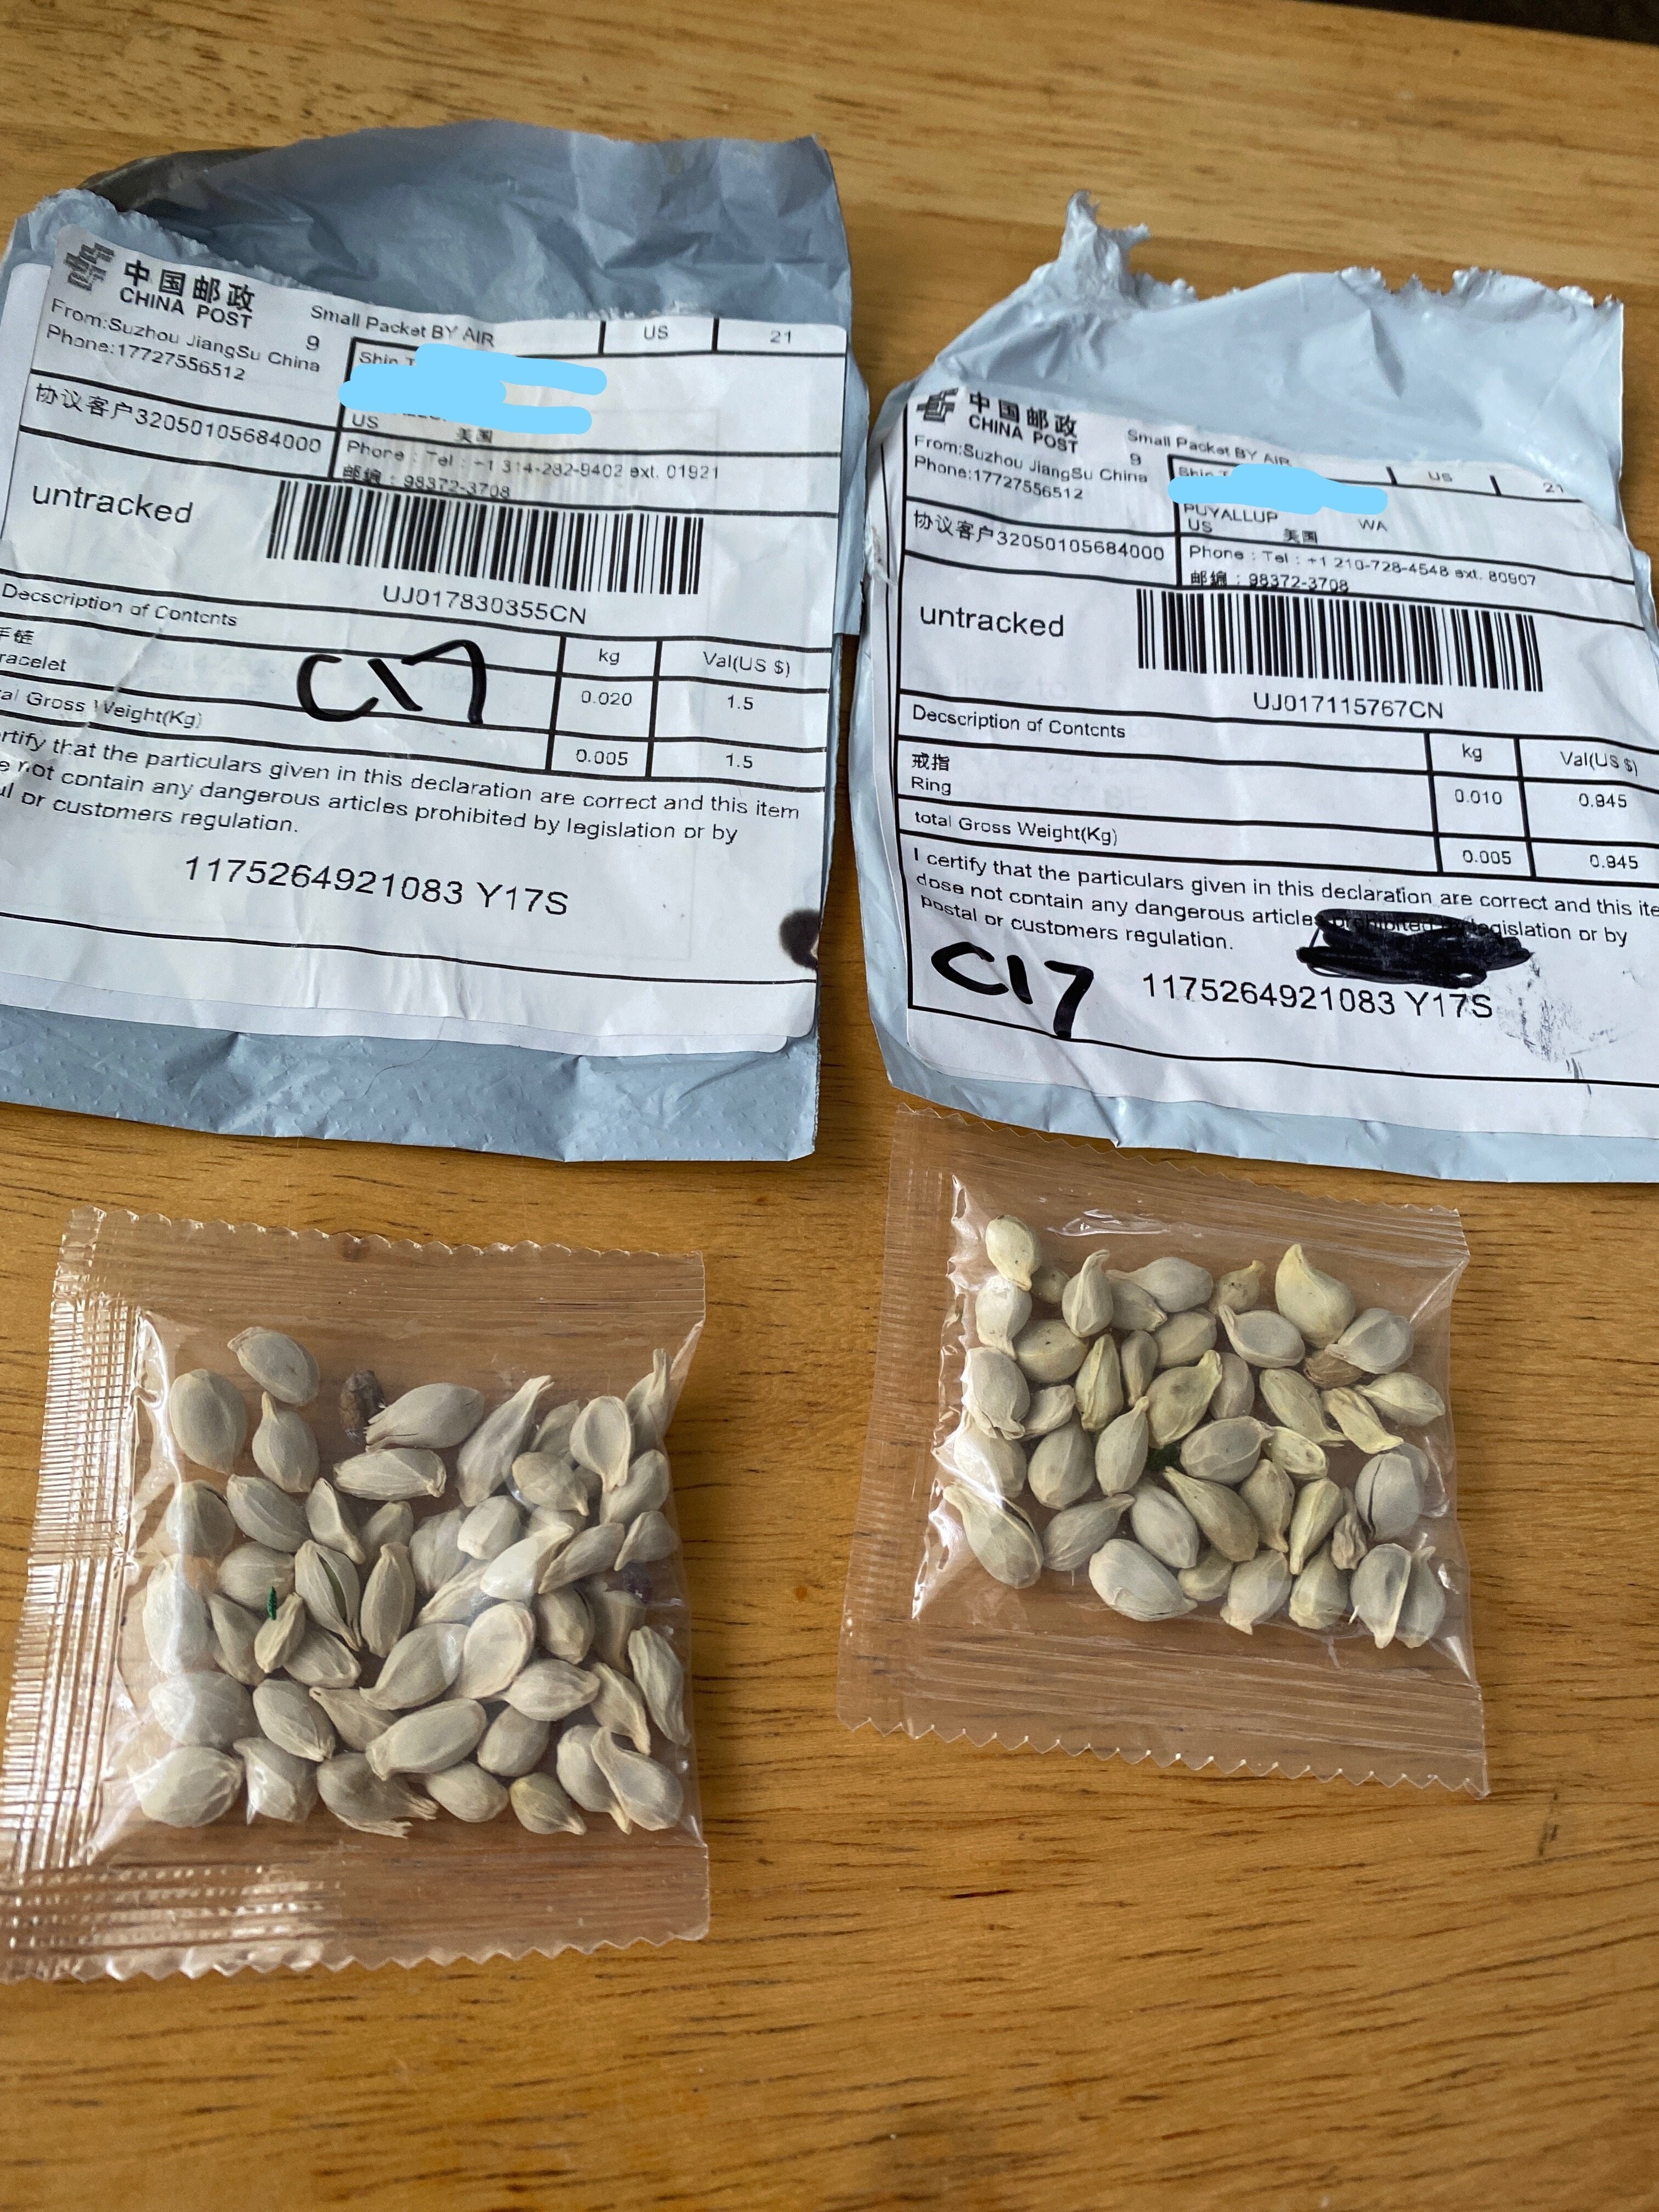 In the US, the seeds have drawn warnings from authorities amid speculation that they could be anything from a prank to bioweapons. Photo: Washington State Department of Agriculture